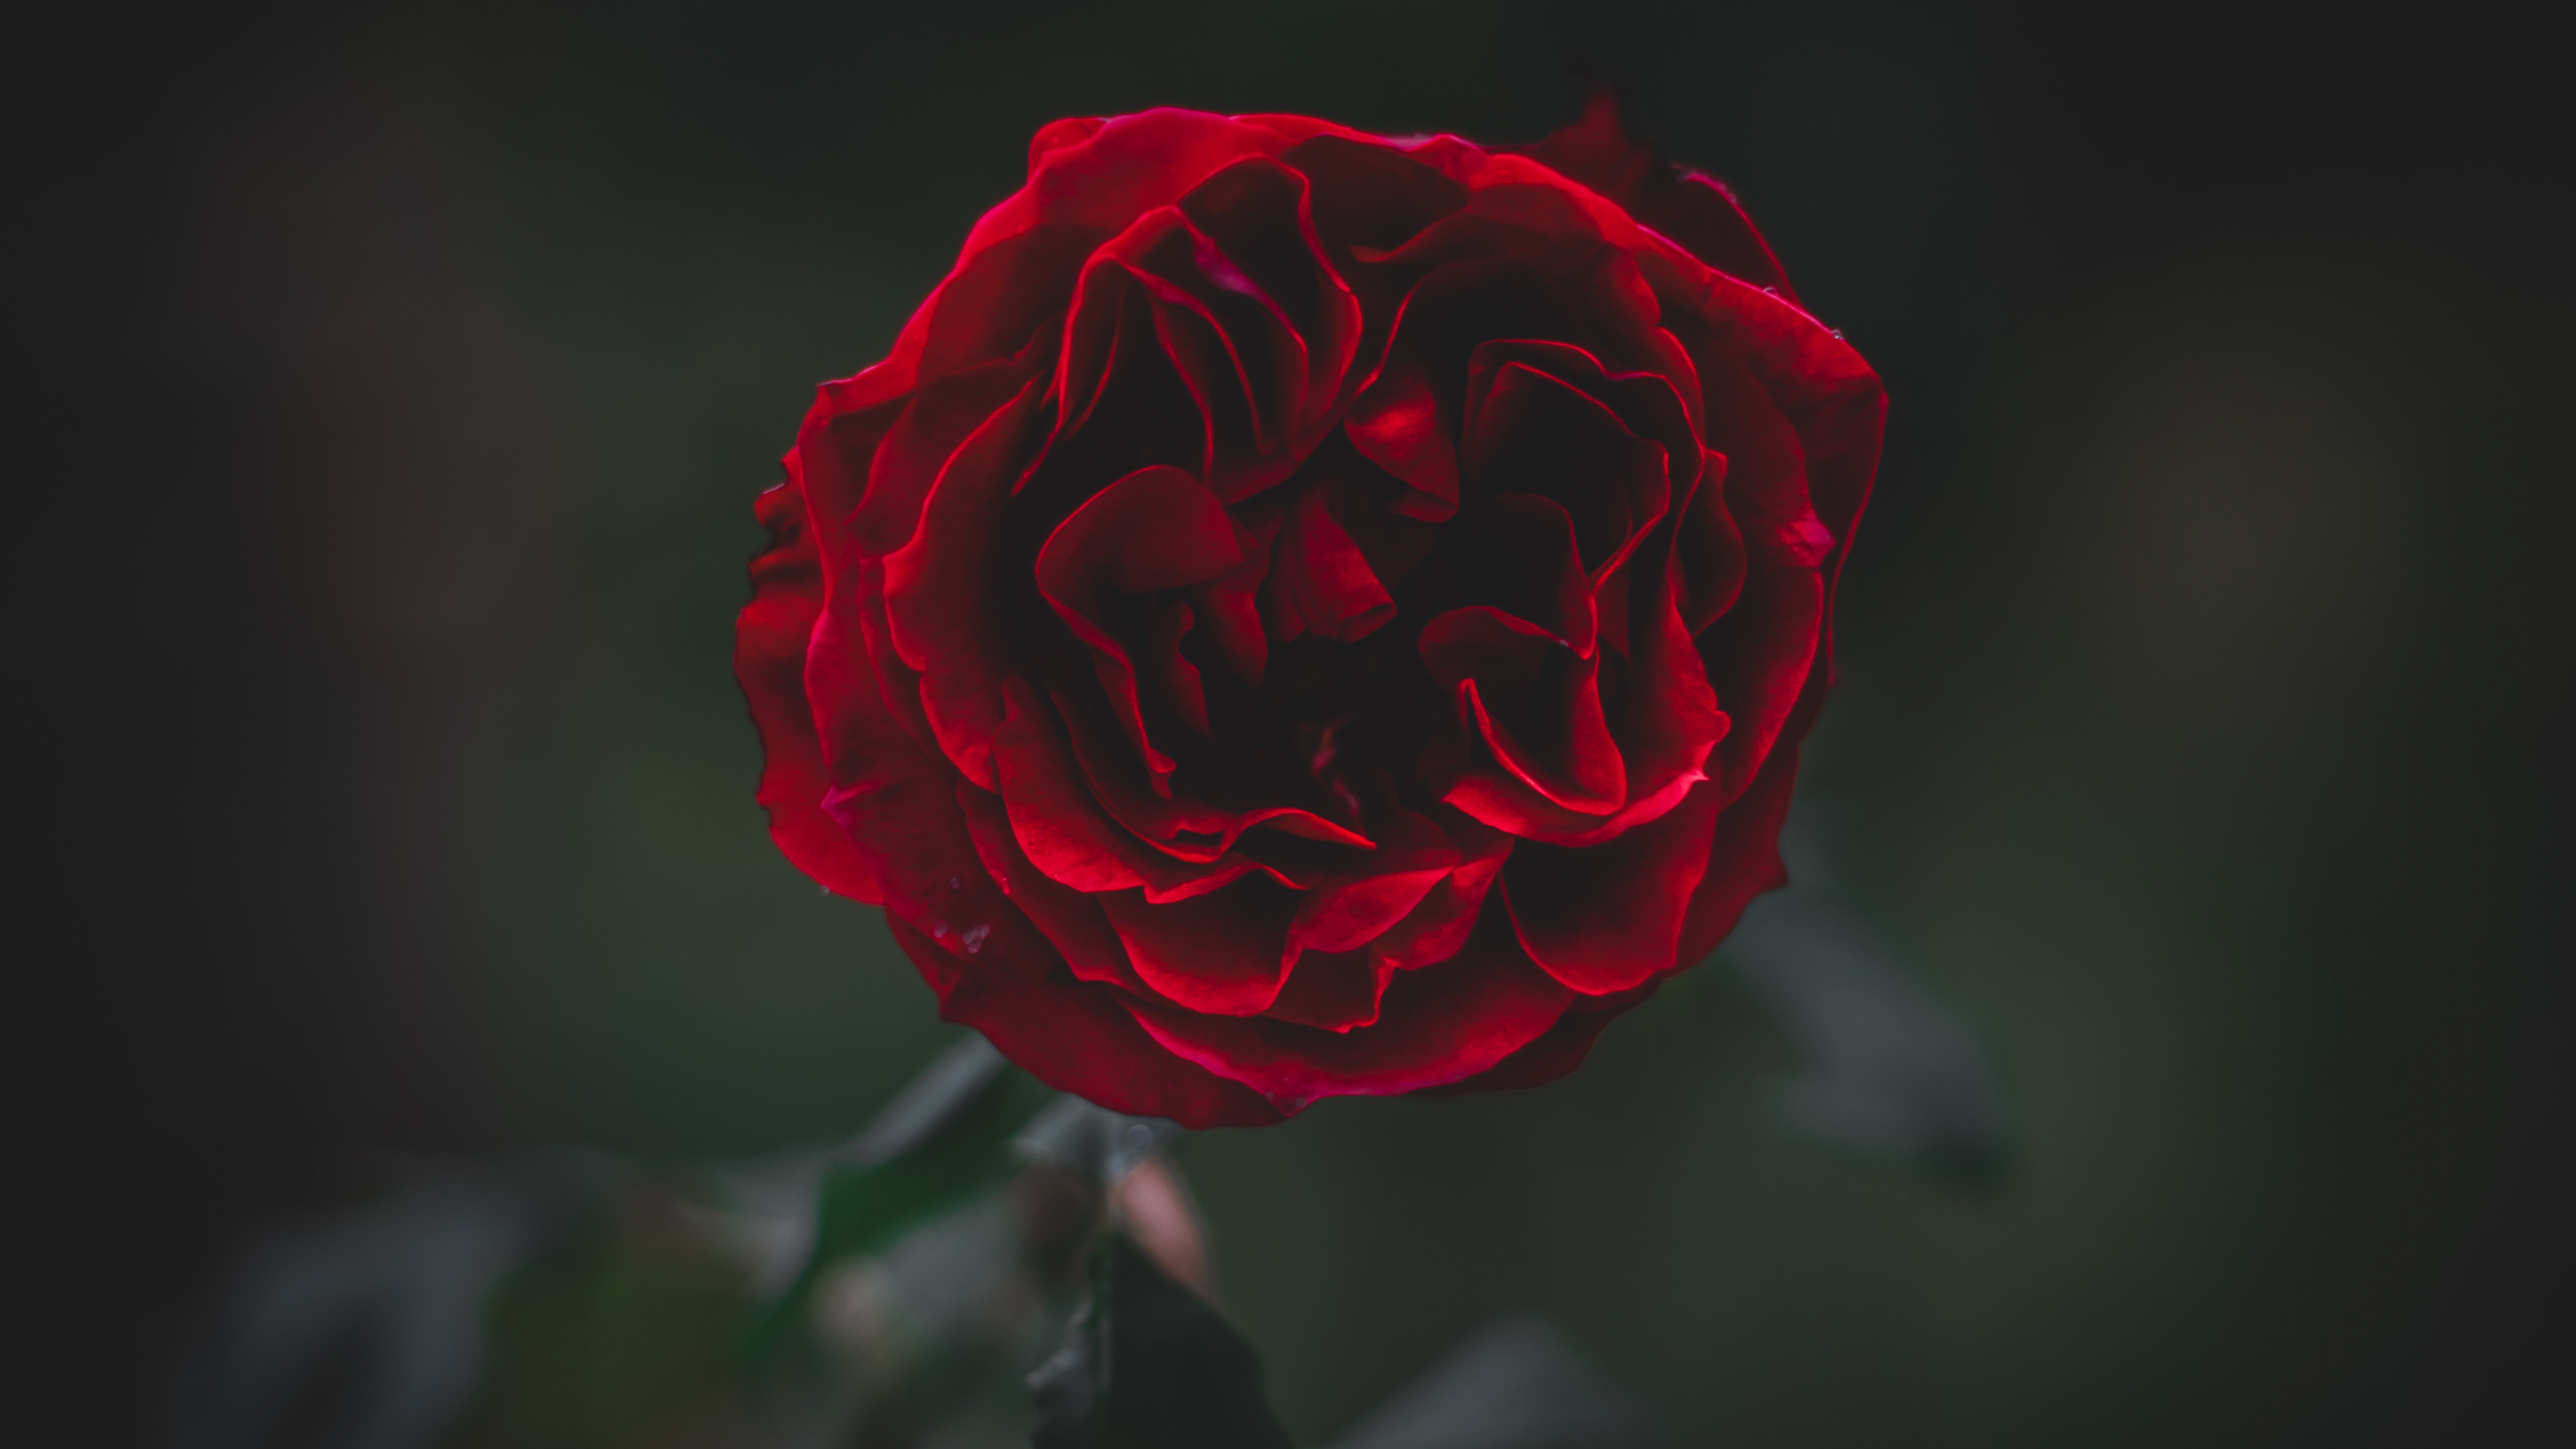 Red Rose in Bloom in Close up Photography. Wallpaper in 3840x2160 Resolution